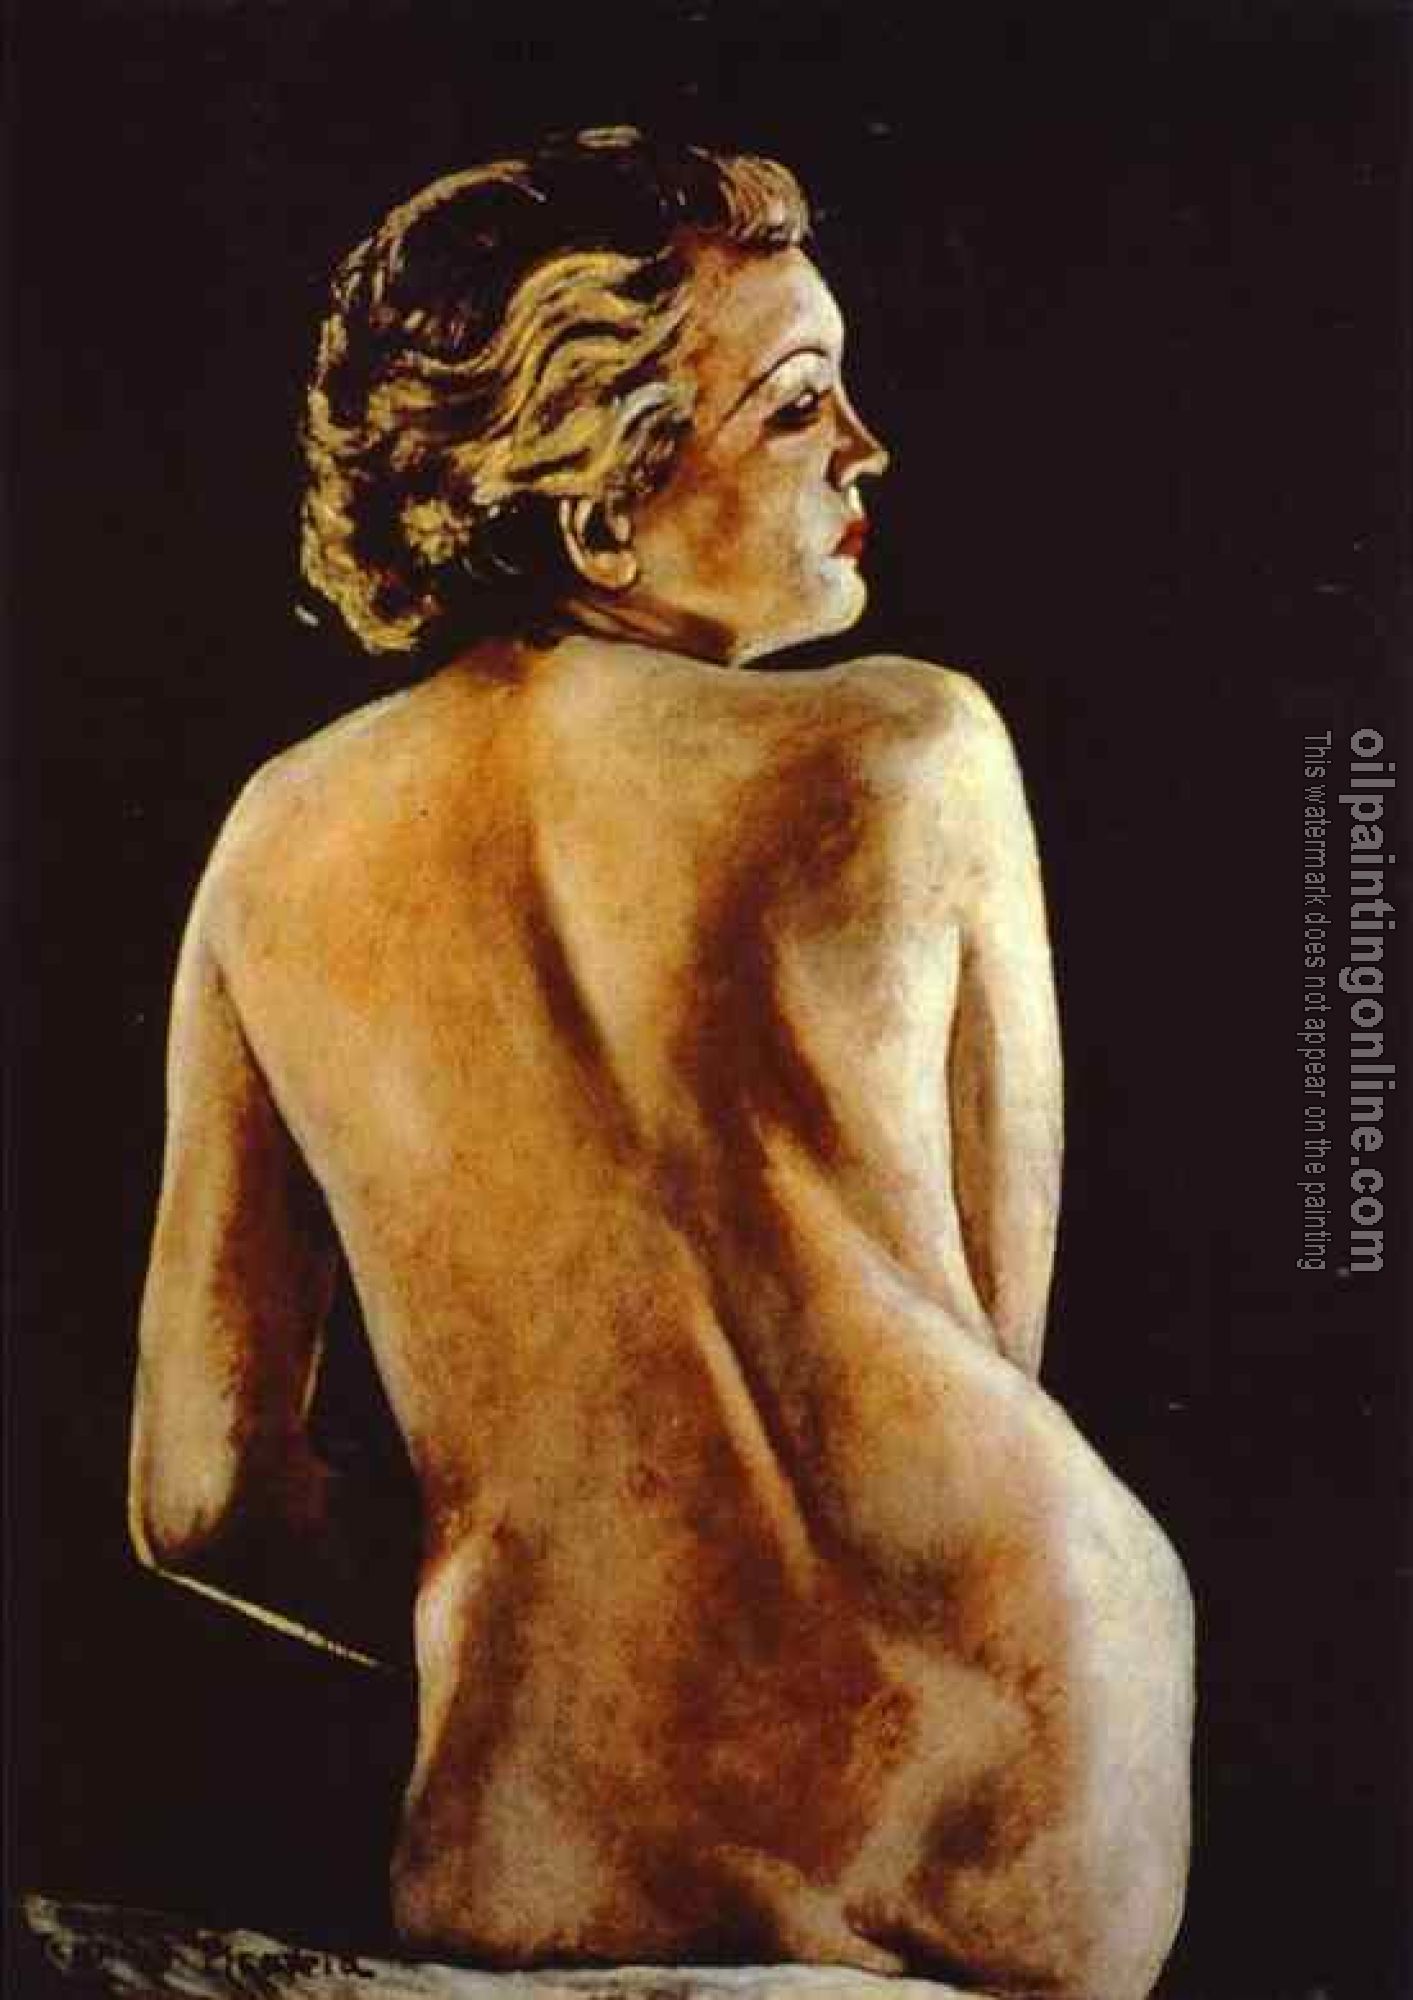 Picabia, Francis - Nude from Back